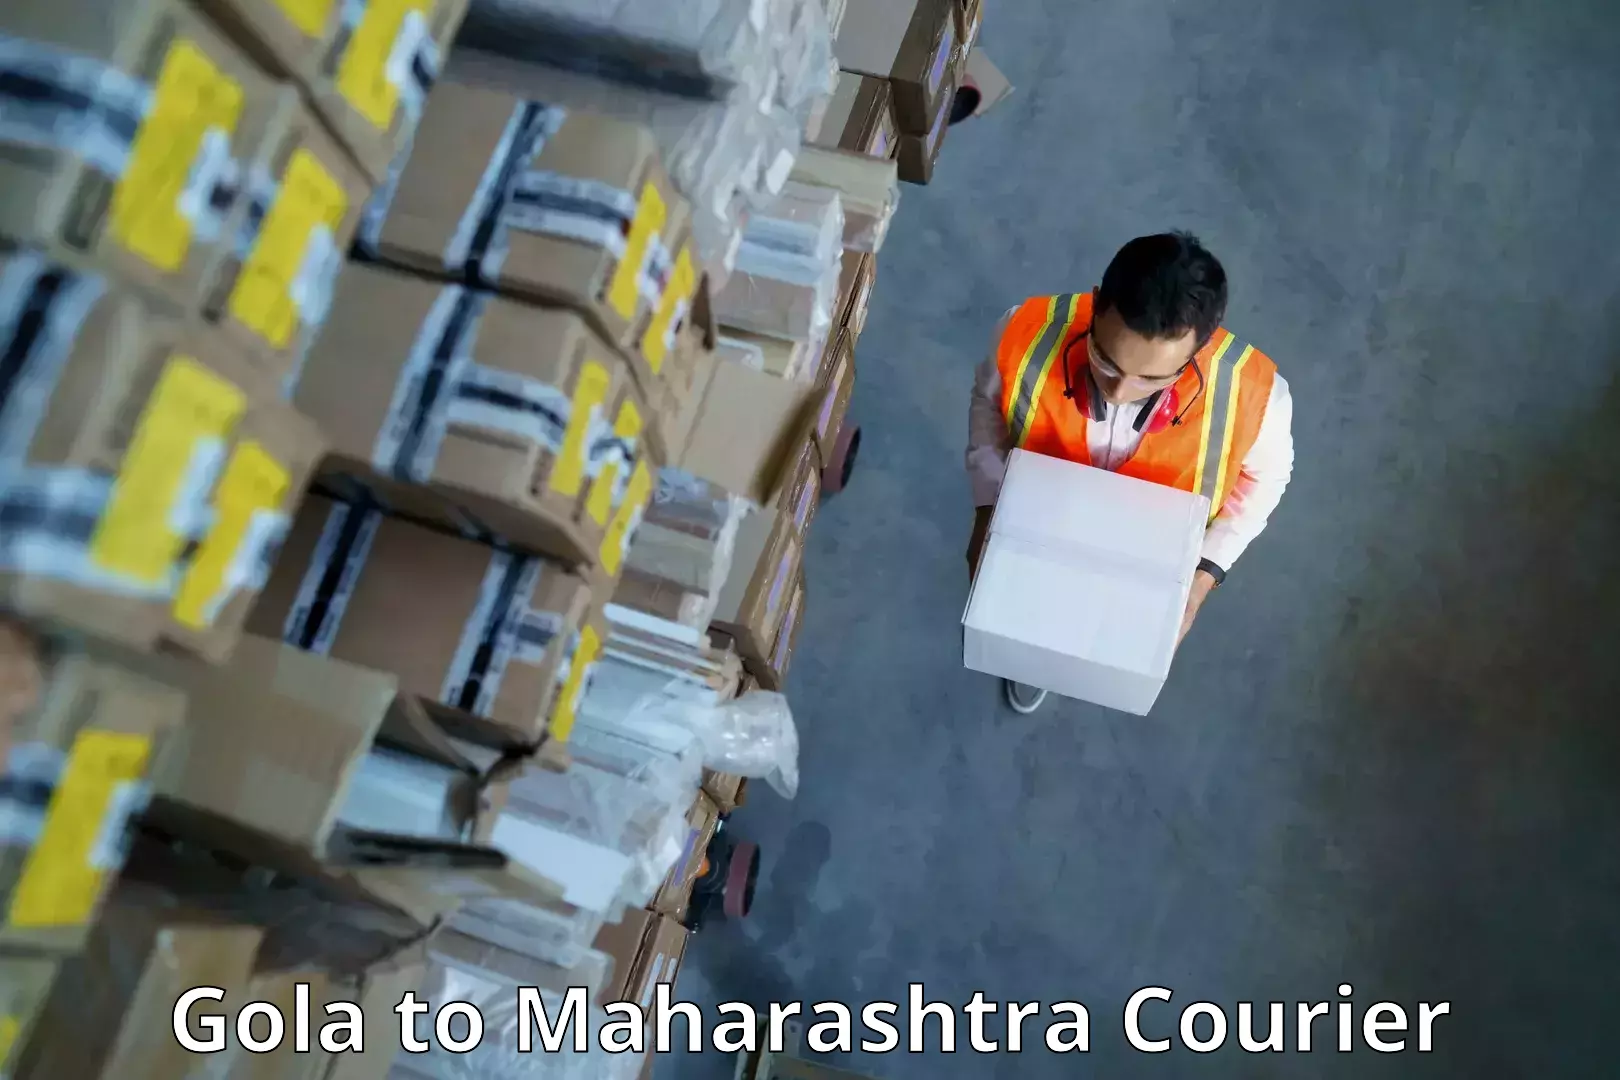 Global courier networks Gola to Hingoli